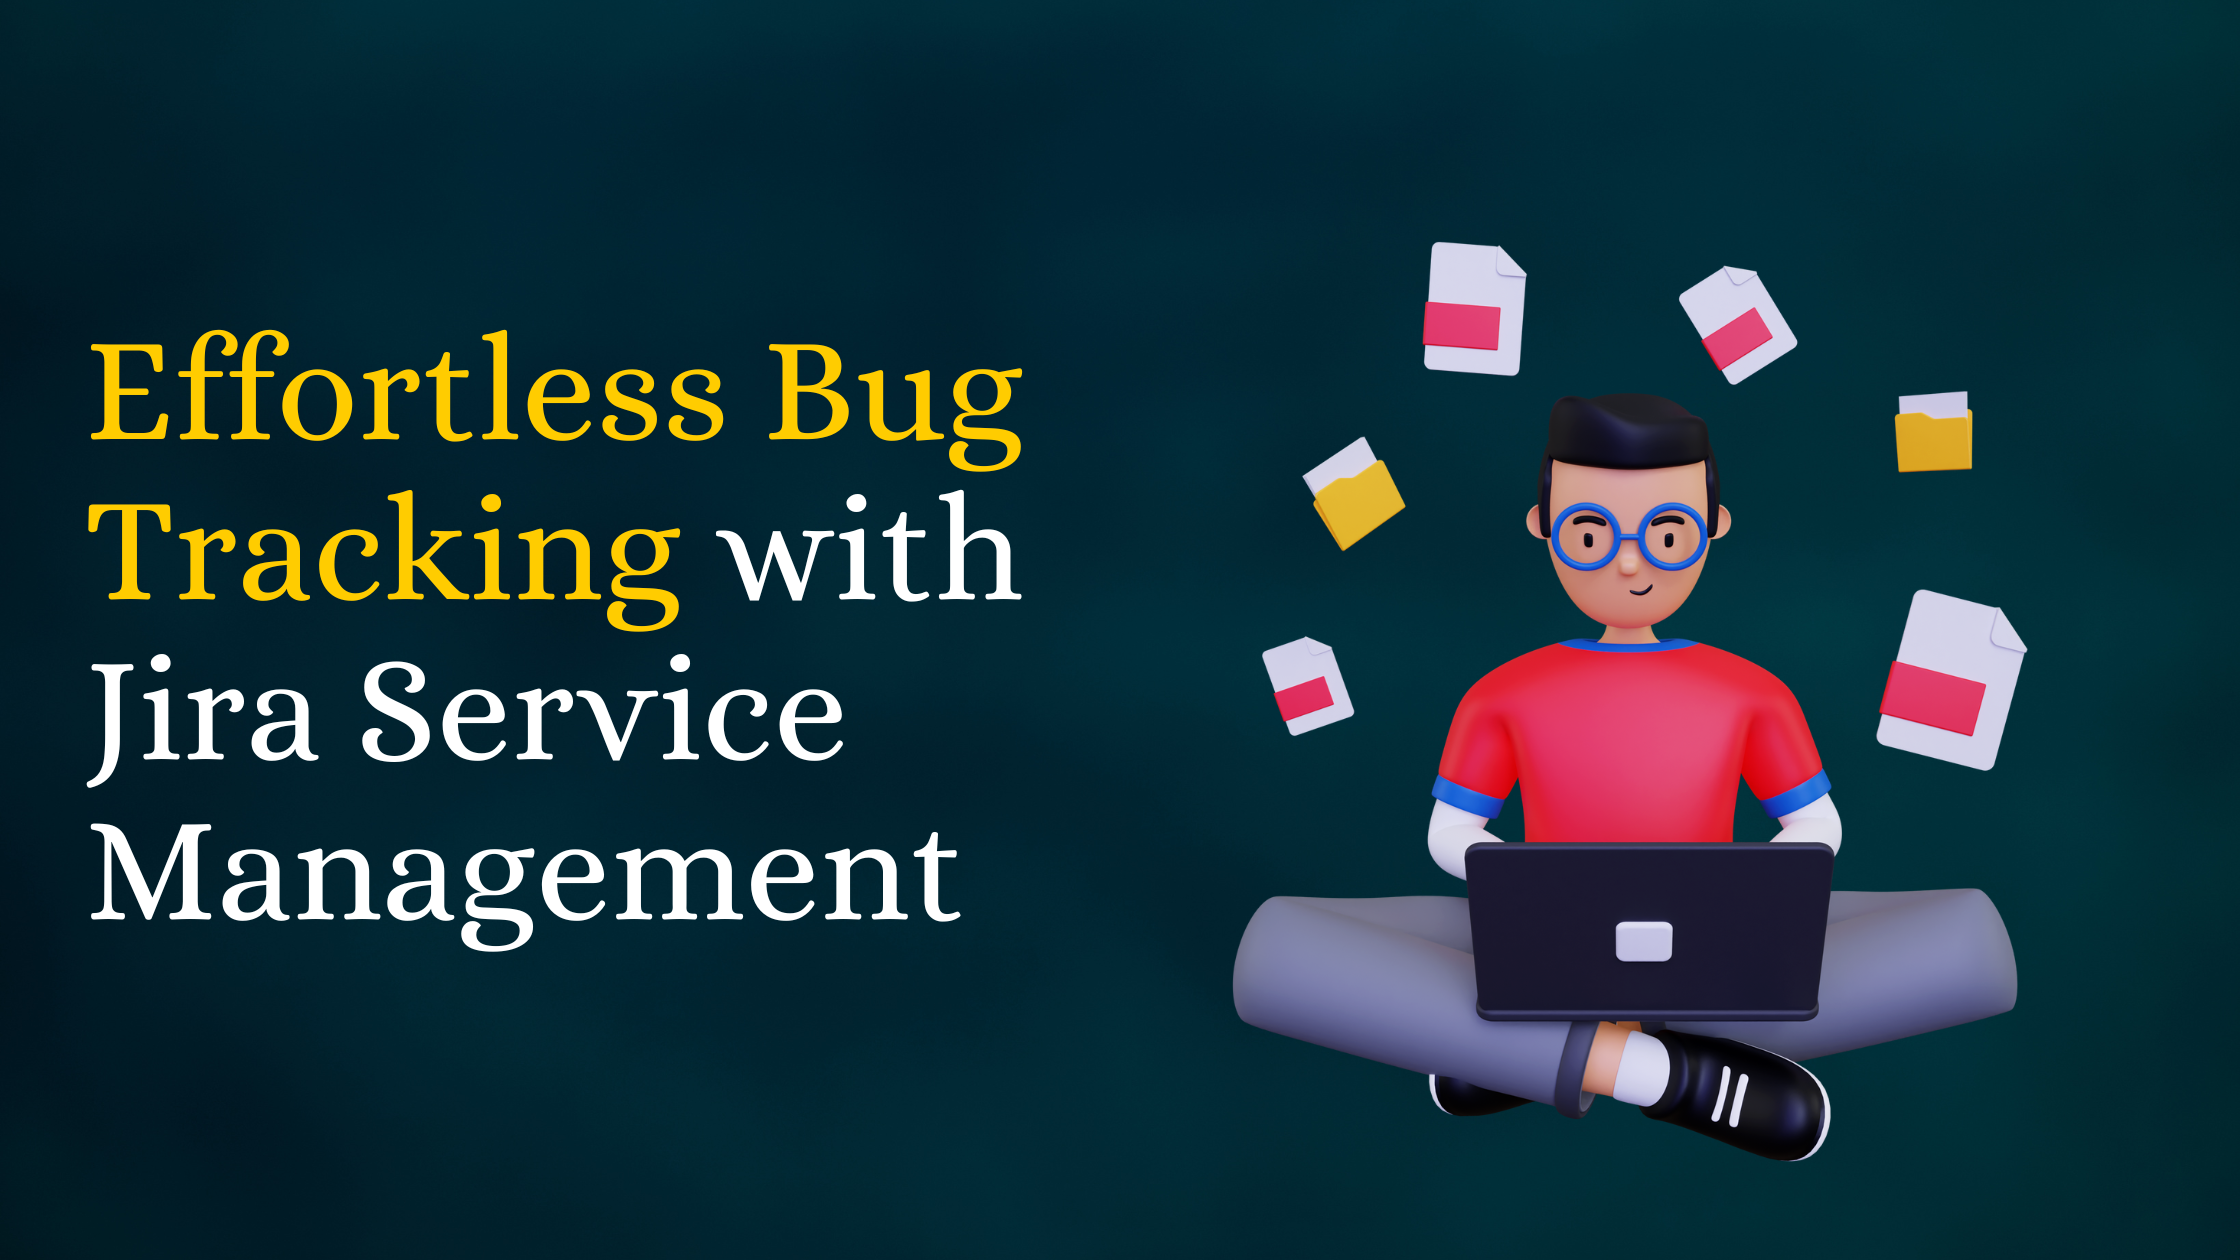 Bug-Tracking-with-Jira-Service-Management